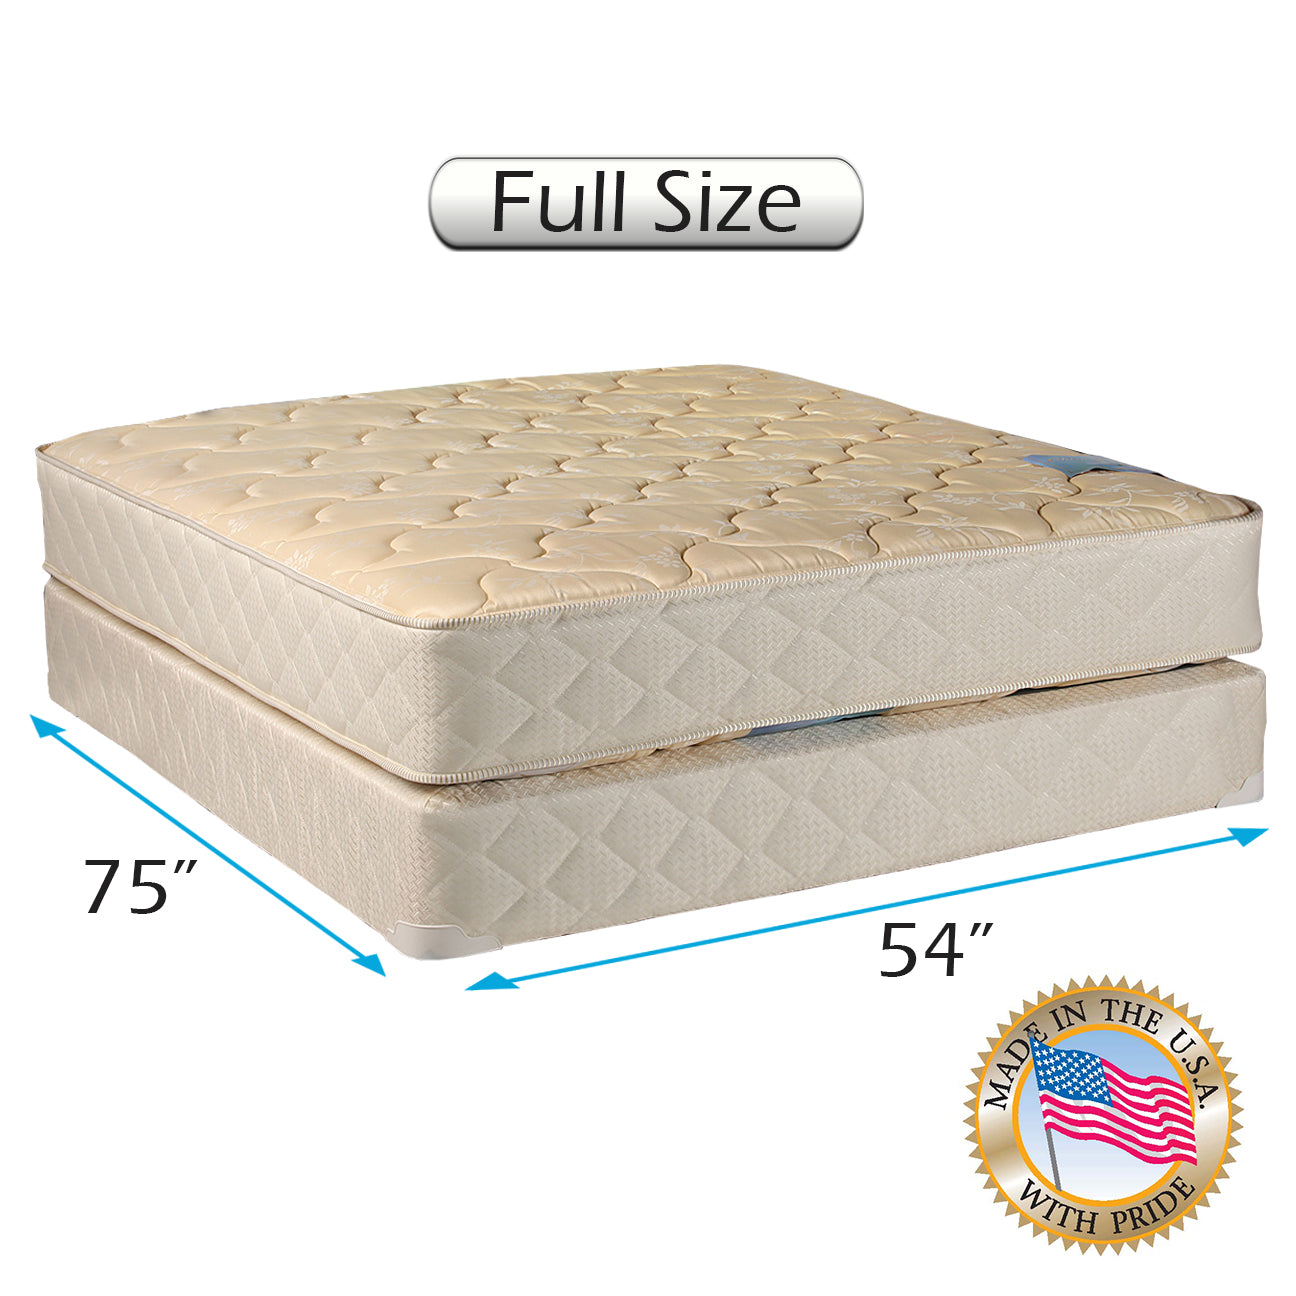 Chiro Premier Orthopedic (Beige) Full Size Mattress and Box Spring Set - Fully Assembled, Good for Your Back, Long Lasting and 2 Sided